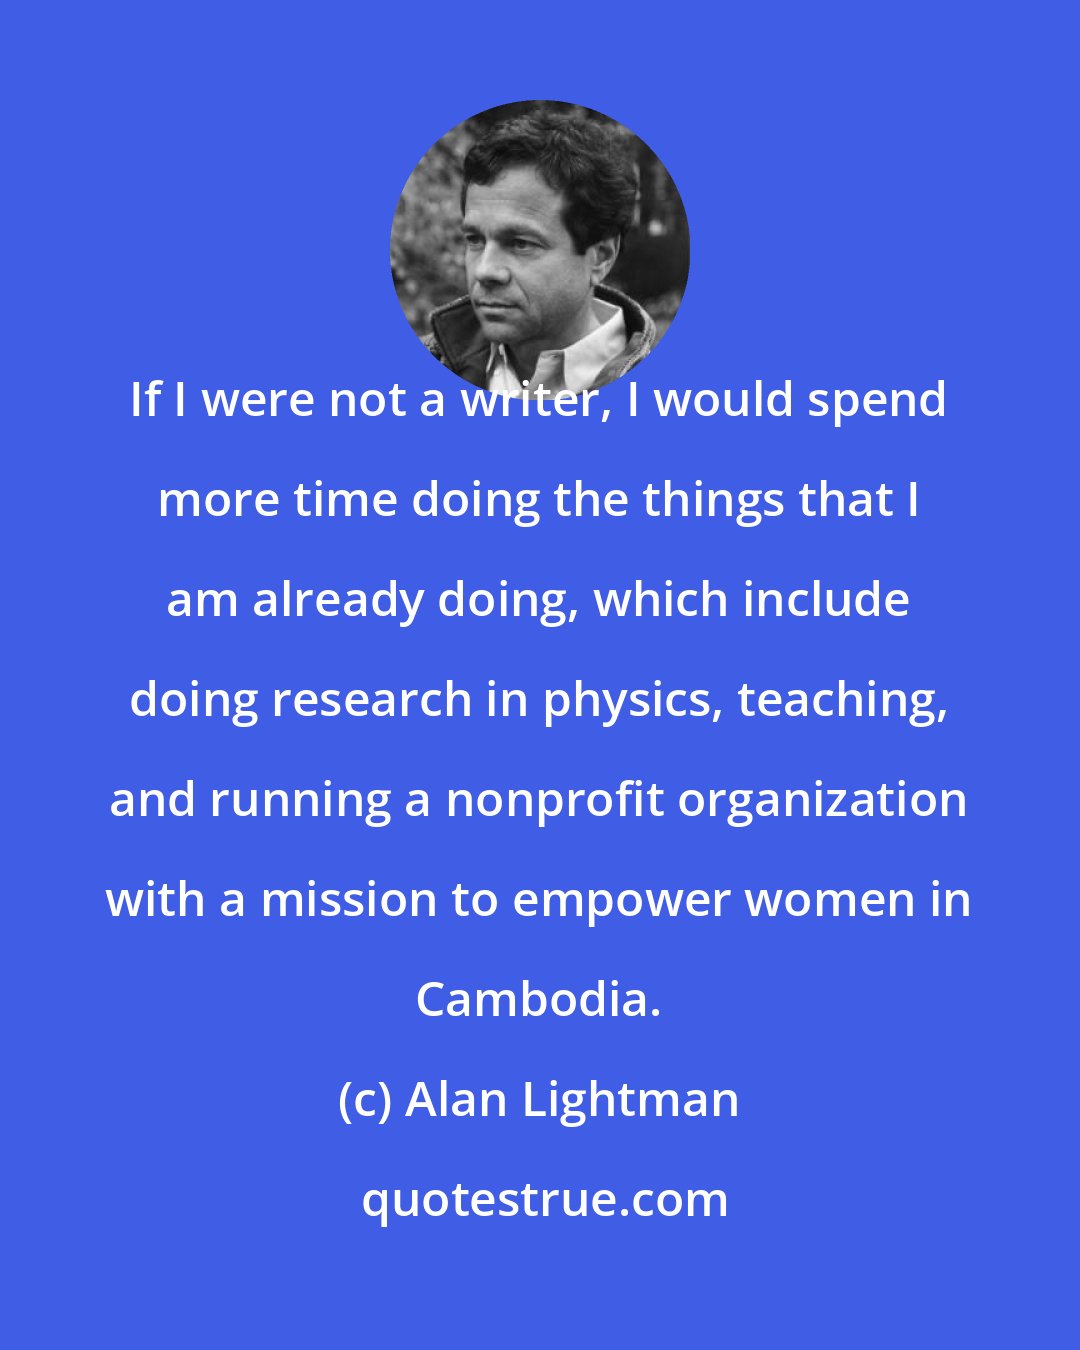 Alan Lightman: If I were not a writer, I would spend more time doing the things that I am already doing, which include doing research in physics, teaching, and running a nonprofit organization with a mission to empower women in Cambodia.